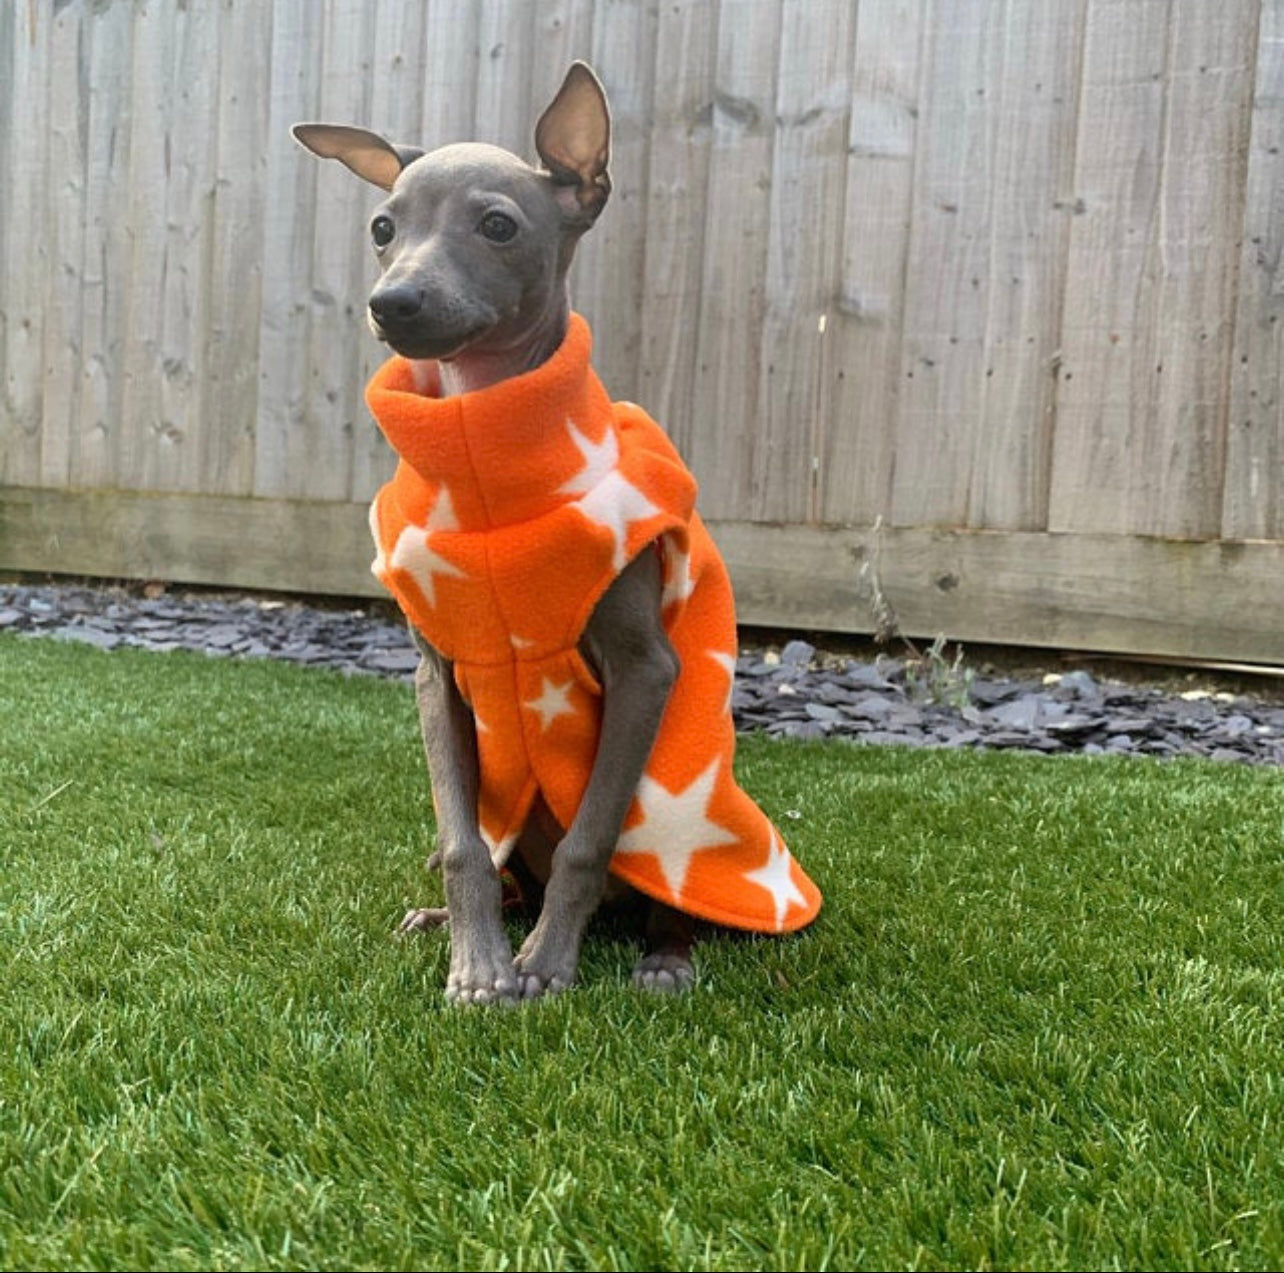 Made to order Italian Greyhound puppy vests - Patterned fleece